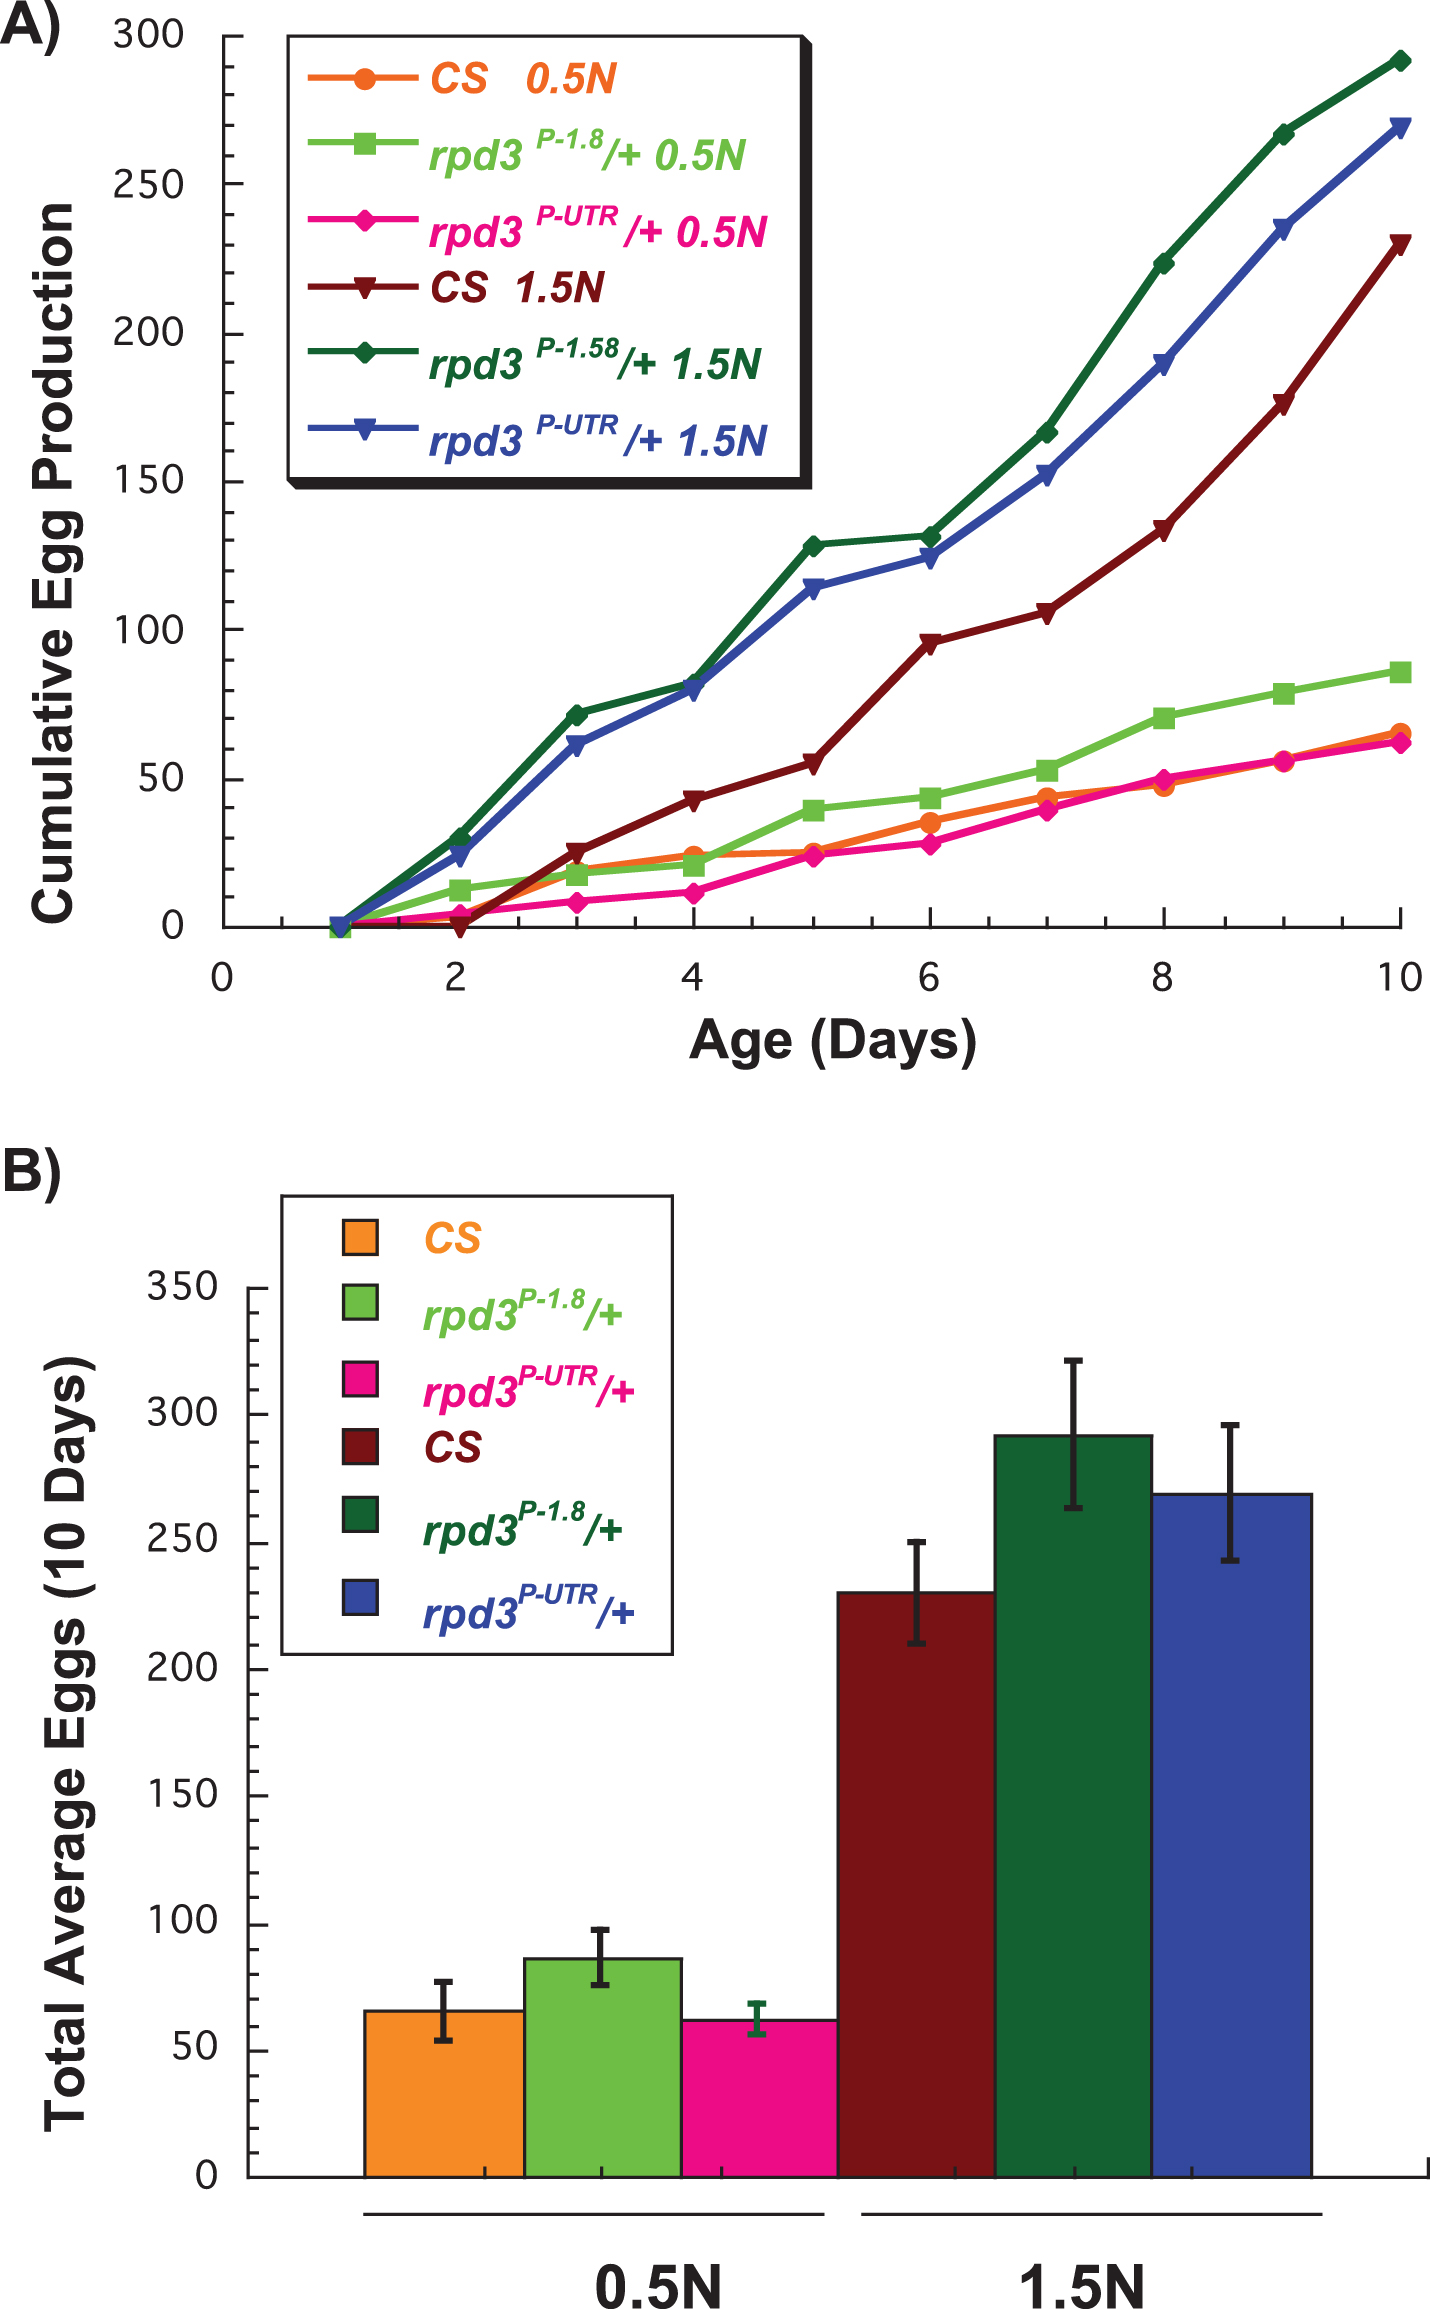 Effect of rpd3 reduction on fly fecundity. (A) The average number of eggs per day laid by wild type Canton-S (CS), rpd3P-UTR/CS, and genetic controls rpd3P-1.8/CS on 0.5 N and 1.5 N diets. (B) The total number of eggs per 10 day period laid by CS, rpd3P-UTR/CS, and rpd3P-1.8/CS on 0.5 N and 1.5 N diets. rpd3P-UTR/CS flies laid similar numbers of eggs on 1.5 N but lower numbers on 0.5 N compared to the controls, a difference that did not reach significance (p = 0.053). 10 vials with a single male and a single female were used per genotype and diet.